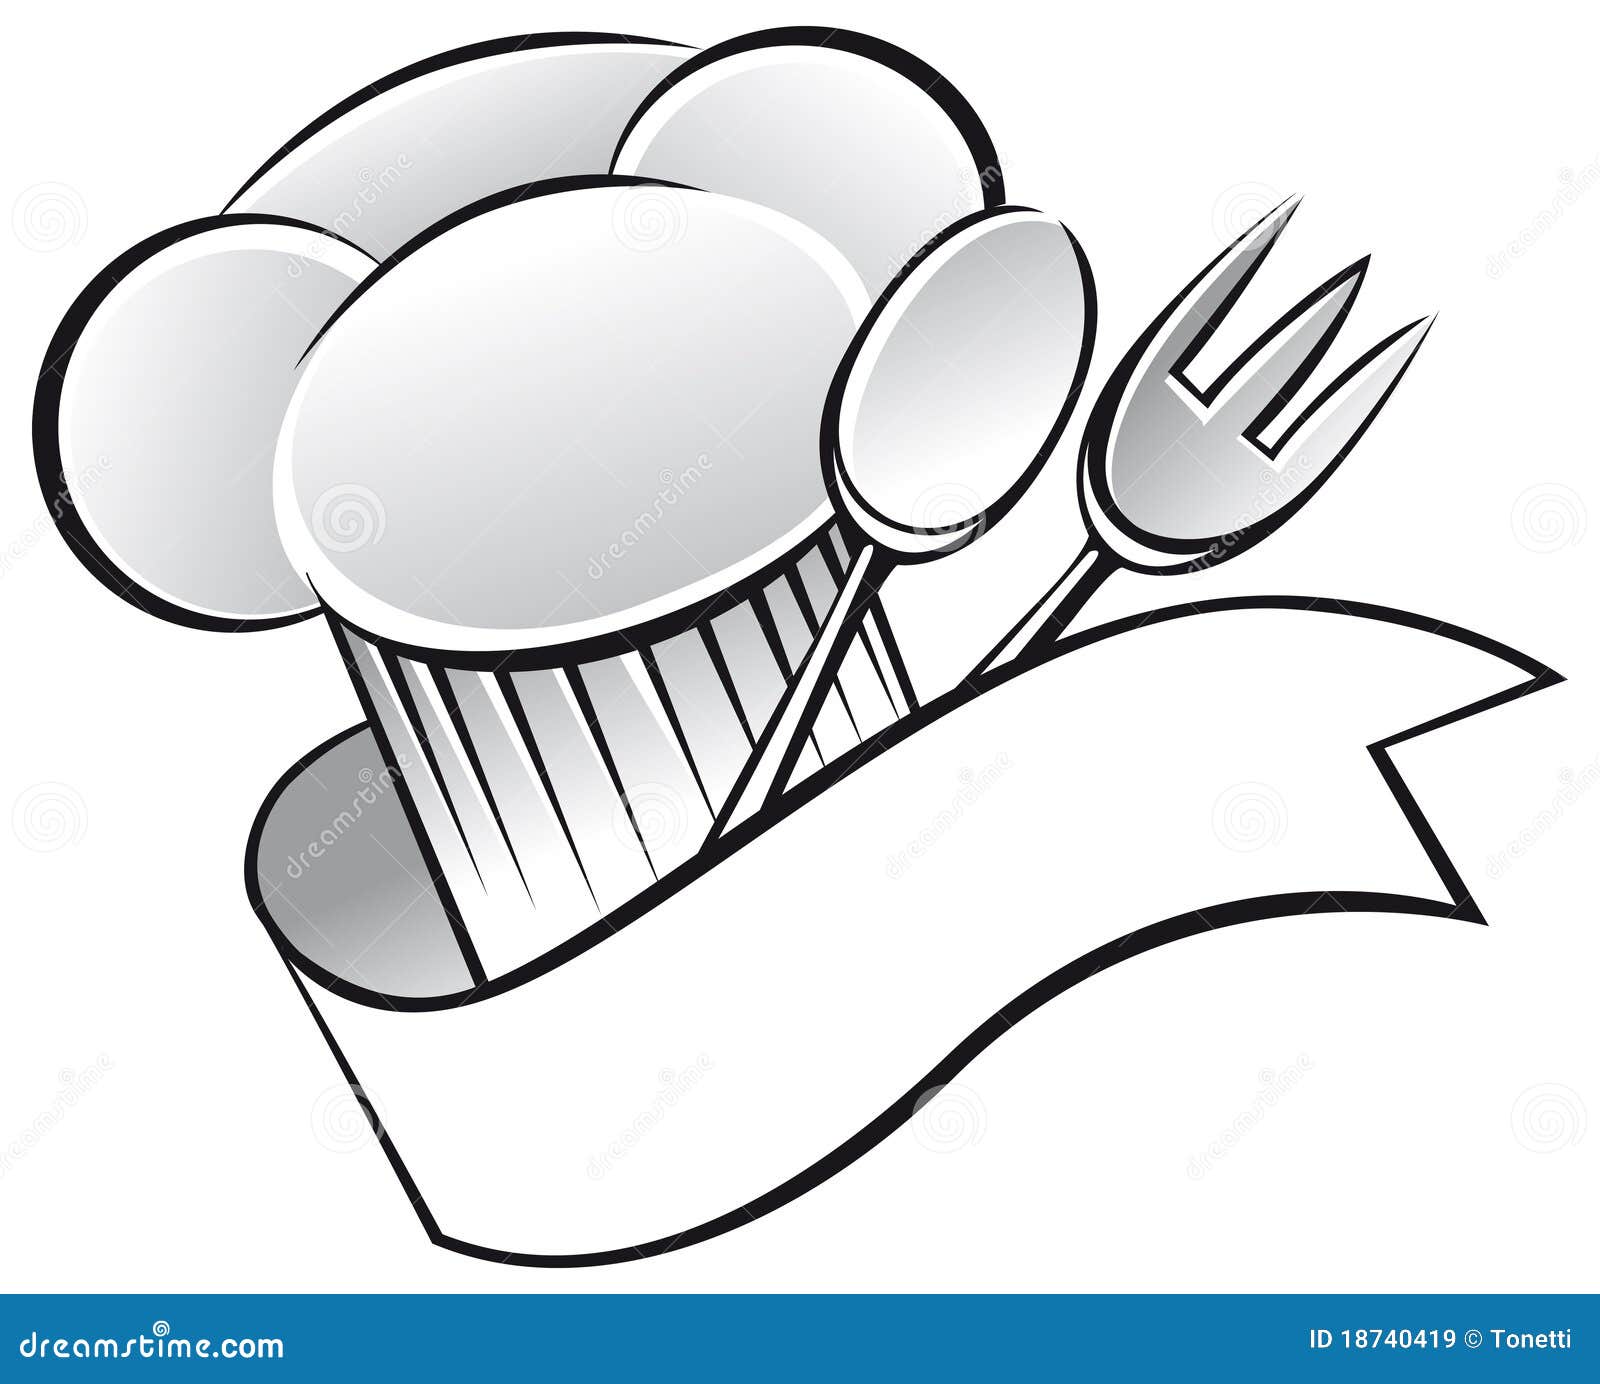 cooking hat clipart - photo #27